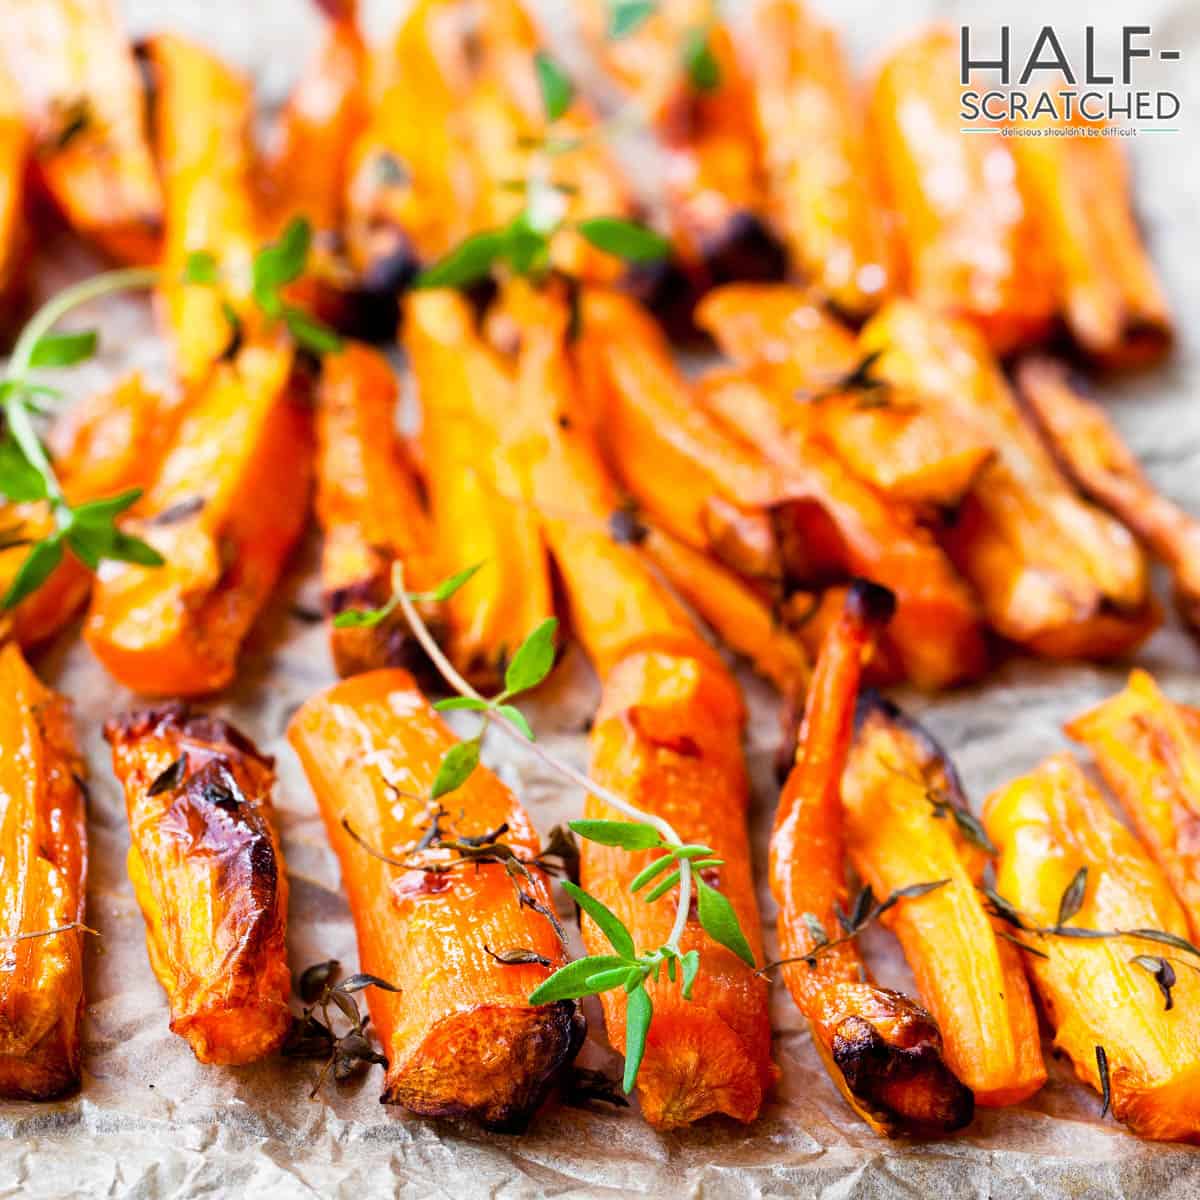 Roasted carrot slices